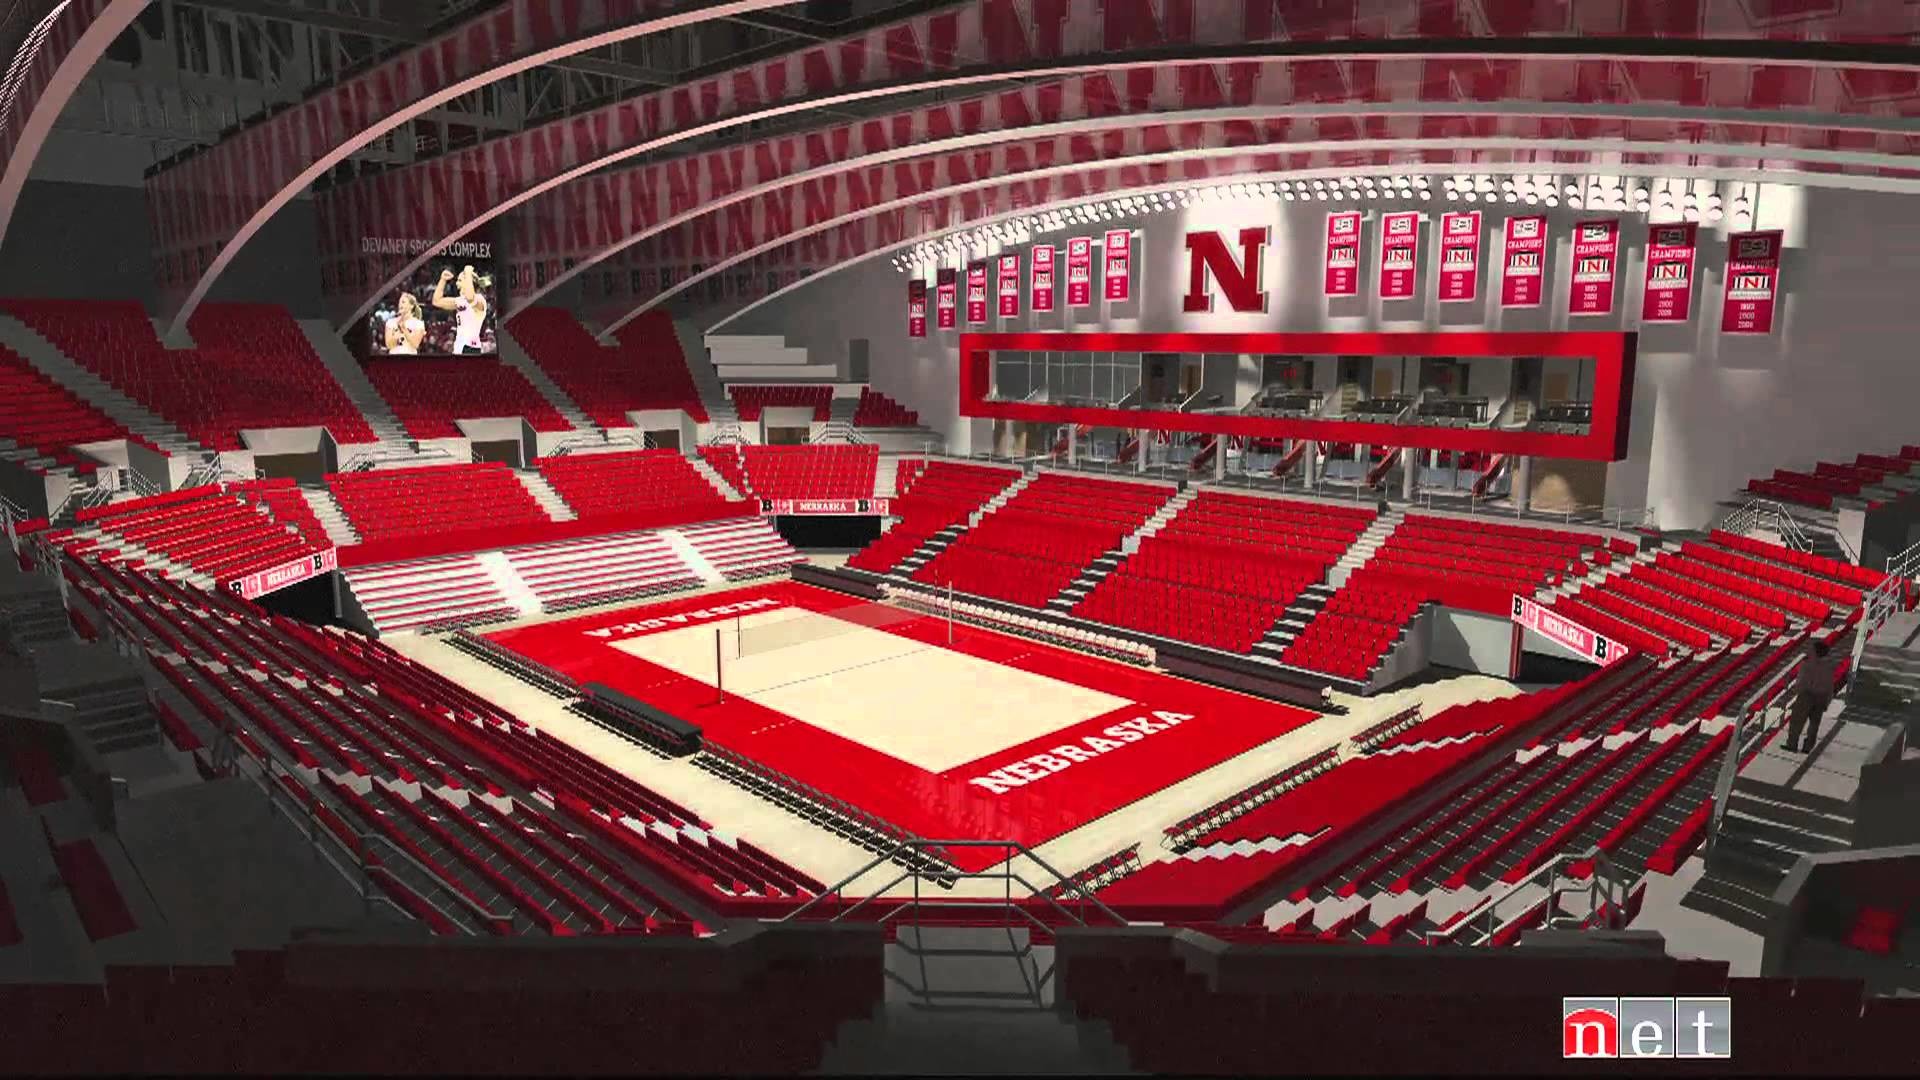 1920x1080 Husker Volleyball and the Devaney Center - An NET Sports Feature - YouTube